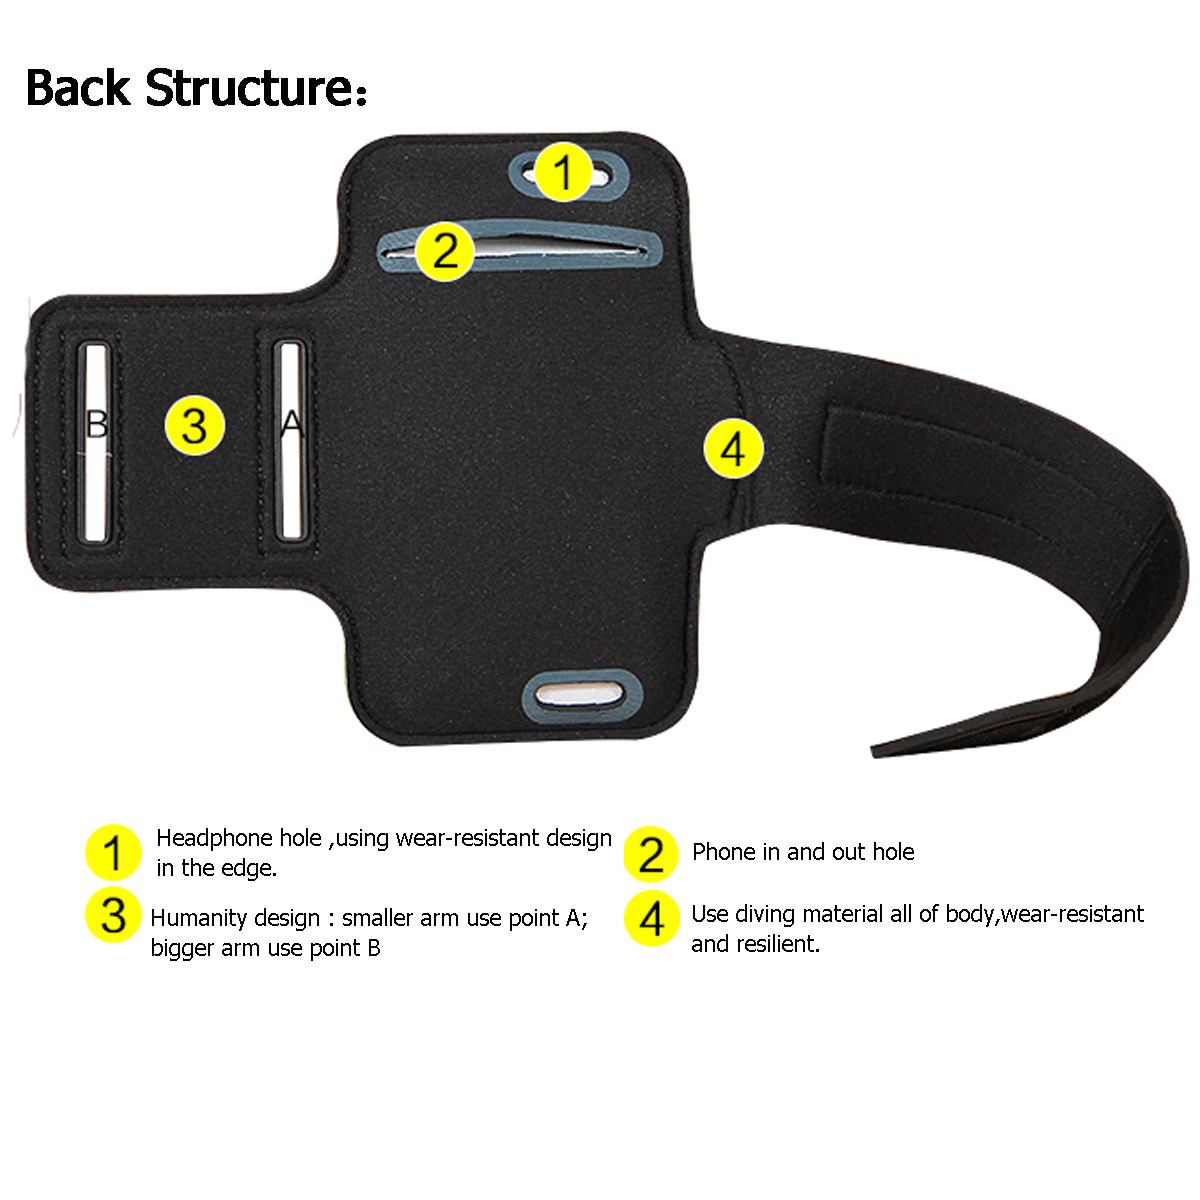 Universal-Sports-Elastic-Armband-Sweatproof-Touch-Screen-Mobile-Phone-Arm-Bags-with-Earphone-Port-fo-1890485-4